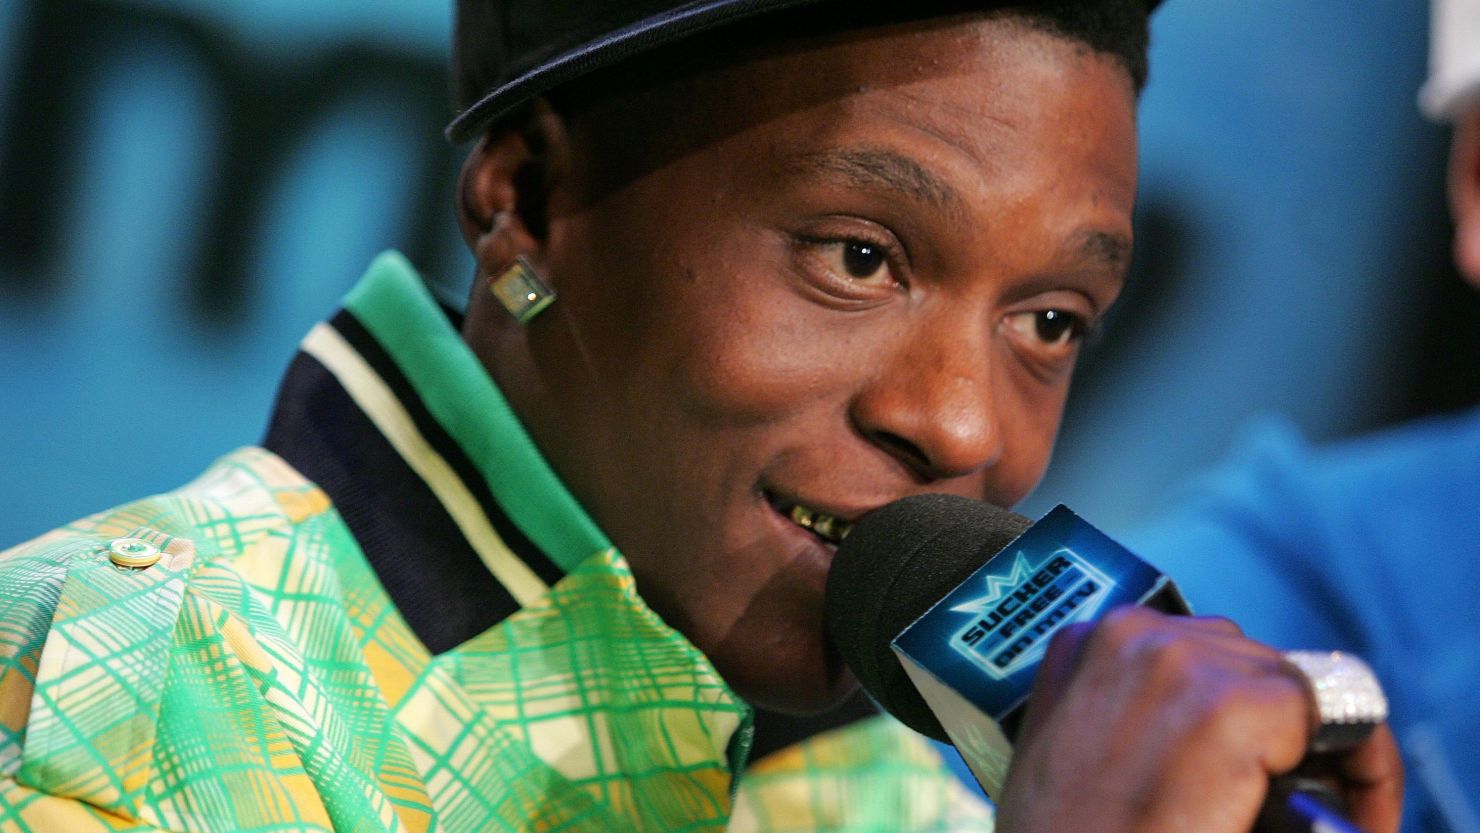 Rapper Boosie BadAzz was arrested on gun and drug charges in Georgia, police say. 